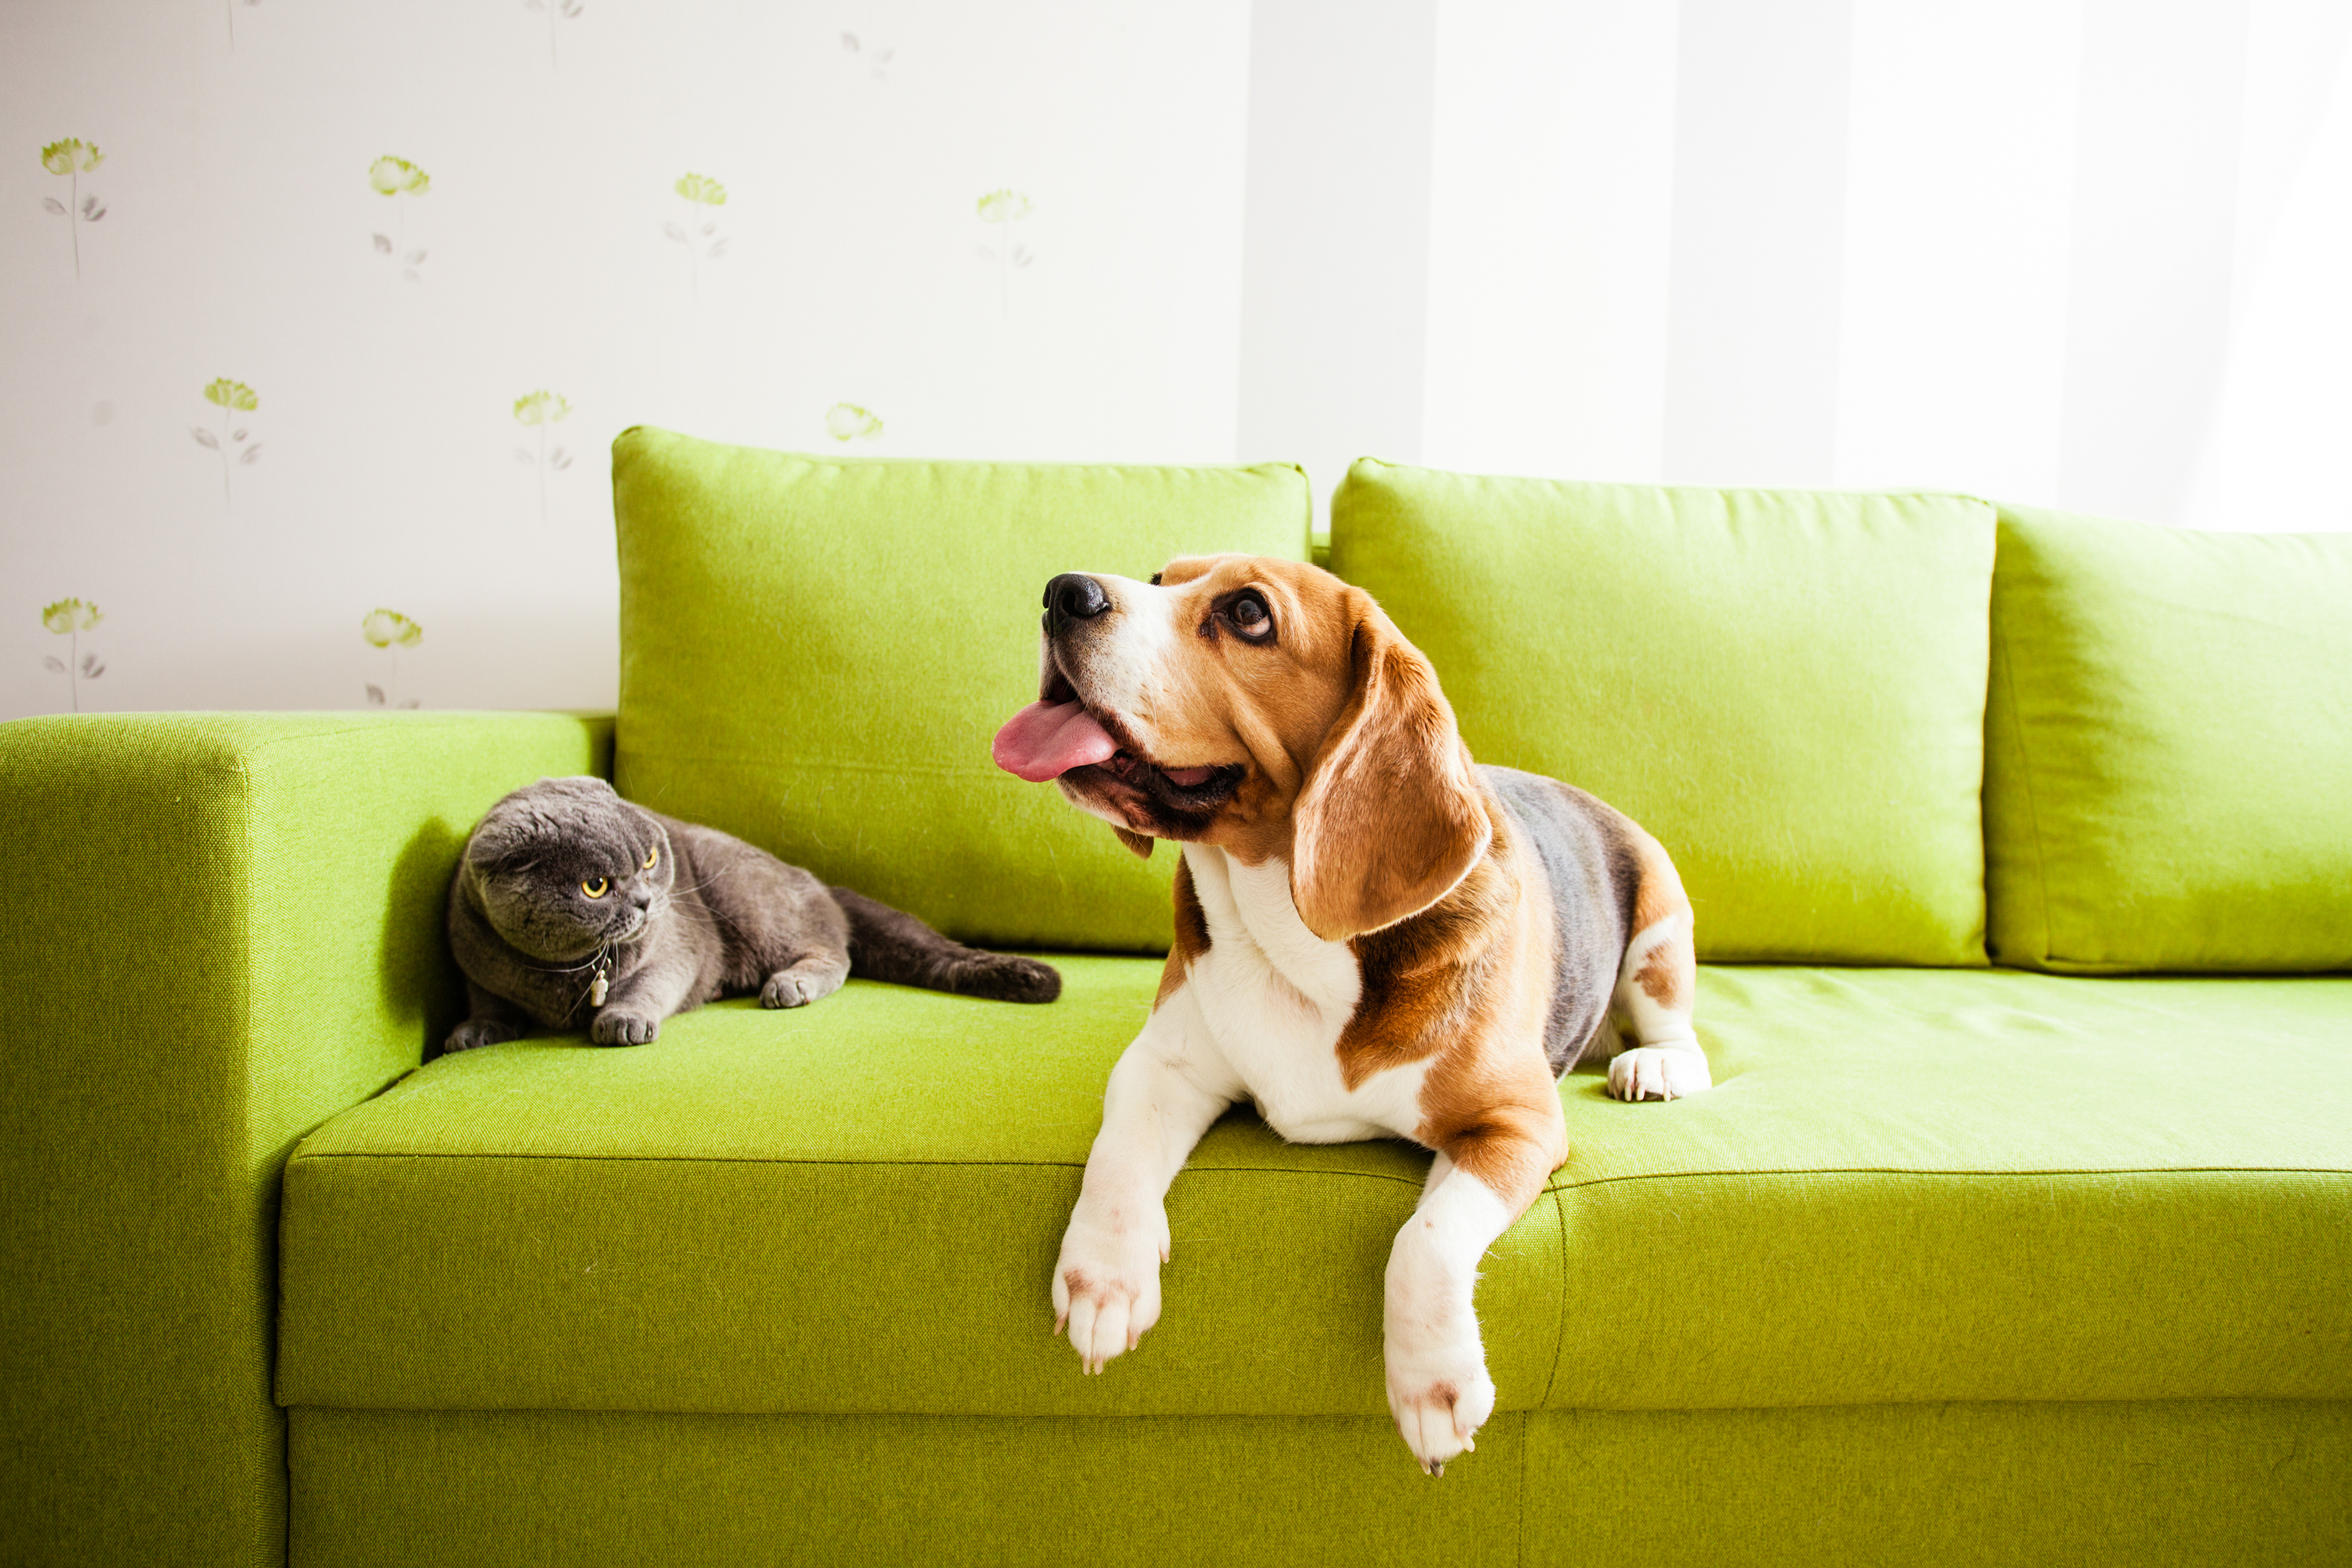 Cat and dog on sofa